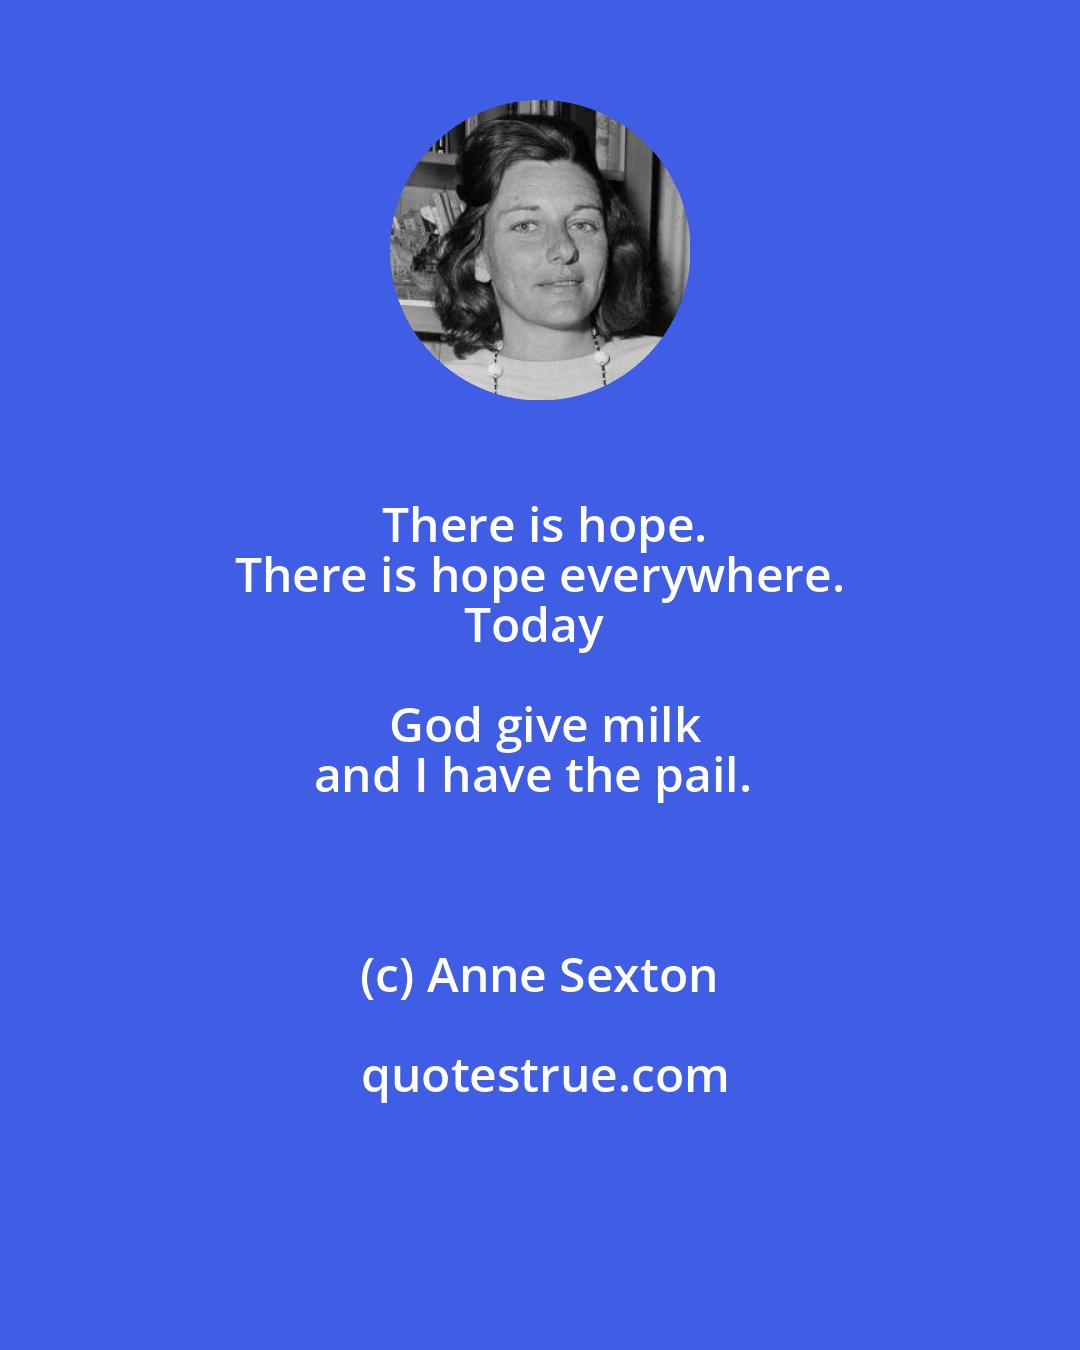 Anne Sexton: There is hope.
There is hope everywhere.
Today God give milk
and I have the pail.